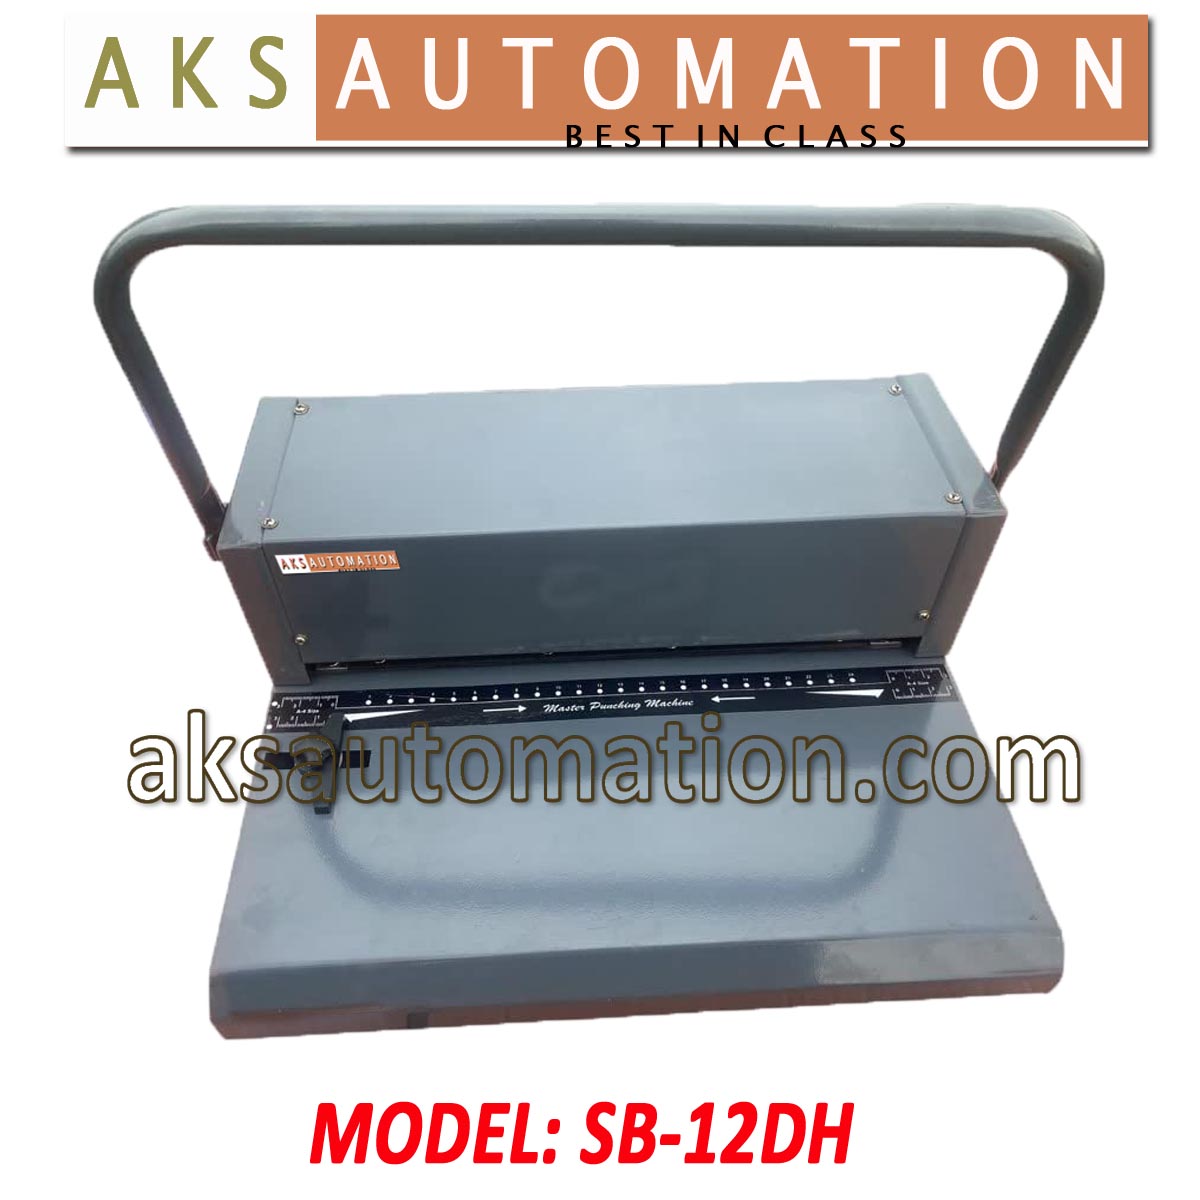 Best Spiral Binding Machine with Double Handle for Parallel Punch| SB-12DH Spiral Binding Machine A4 Size